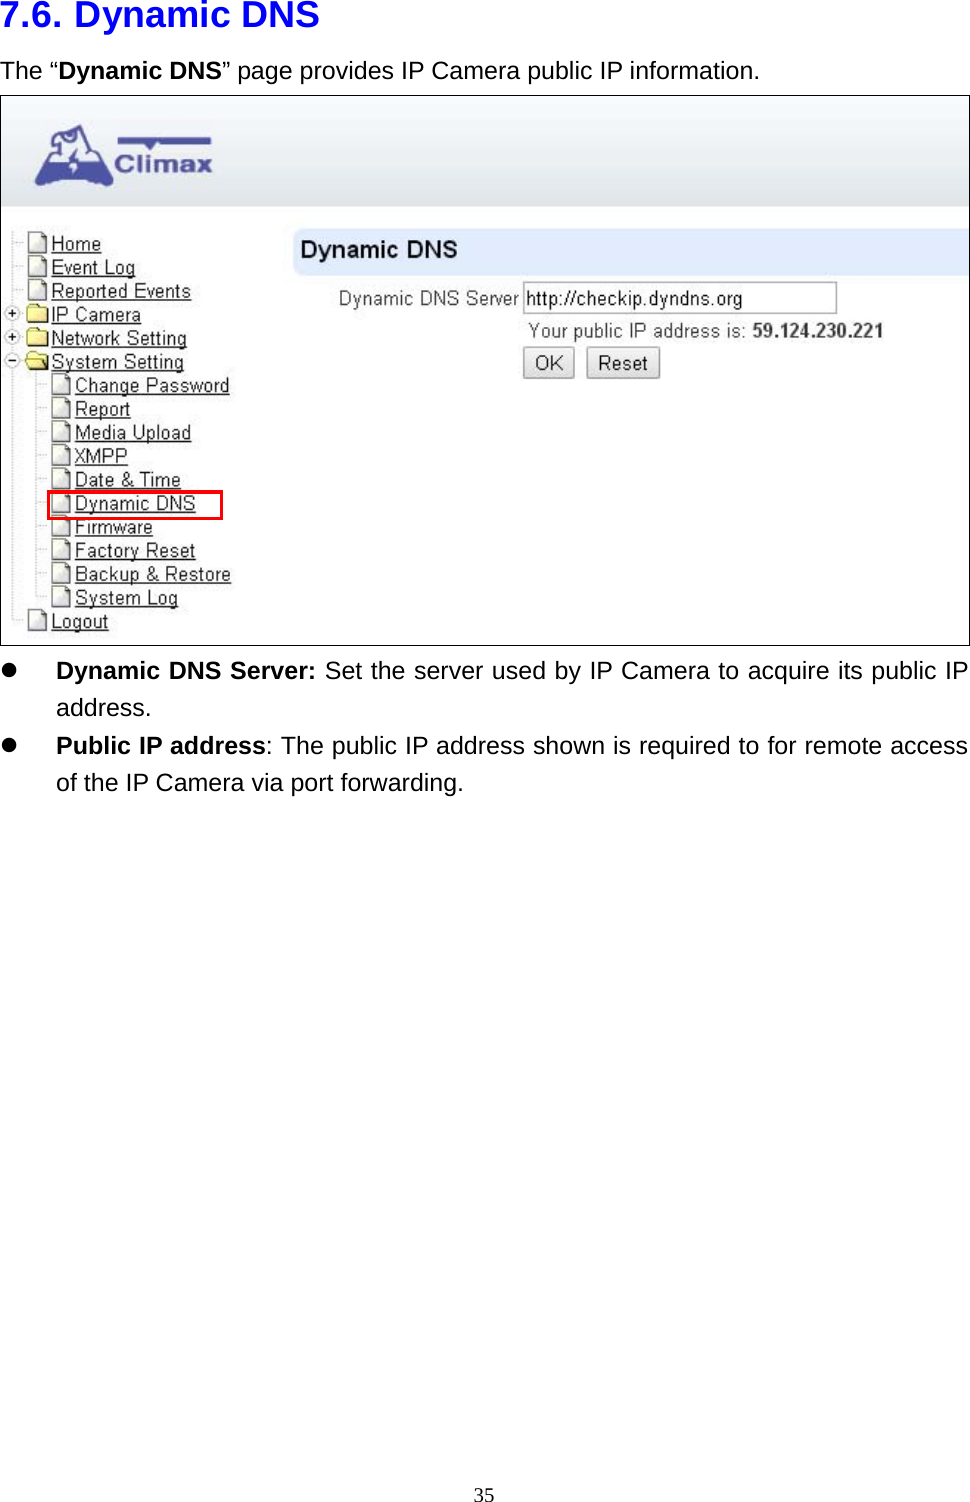 35  7.6. Dynamic DNS The “Dynamic DNS” page provides IP Camera public IP information.  z Dynamic DNS Server: Set the server used by IP Camera to acquire its public IP address. z Public IP address: The public IP address shown is required to for remote access of the IP Camera via port forwarding.                  